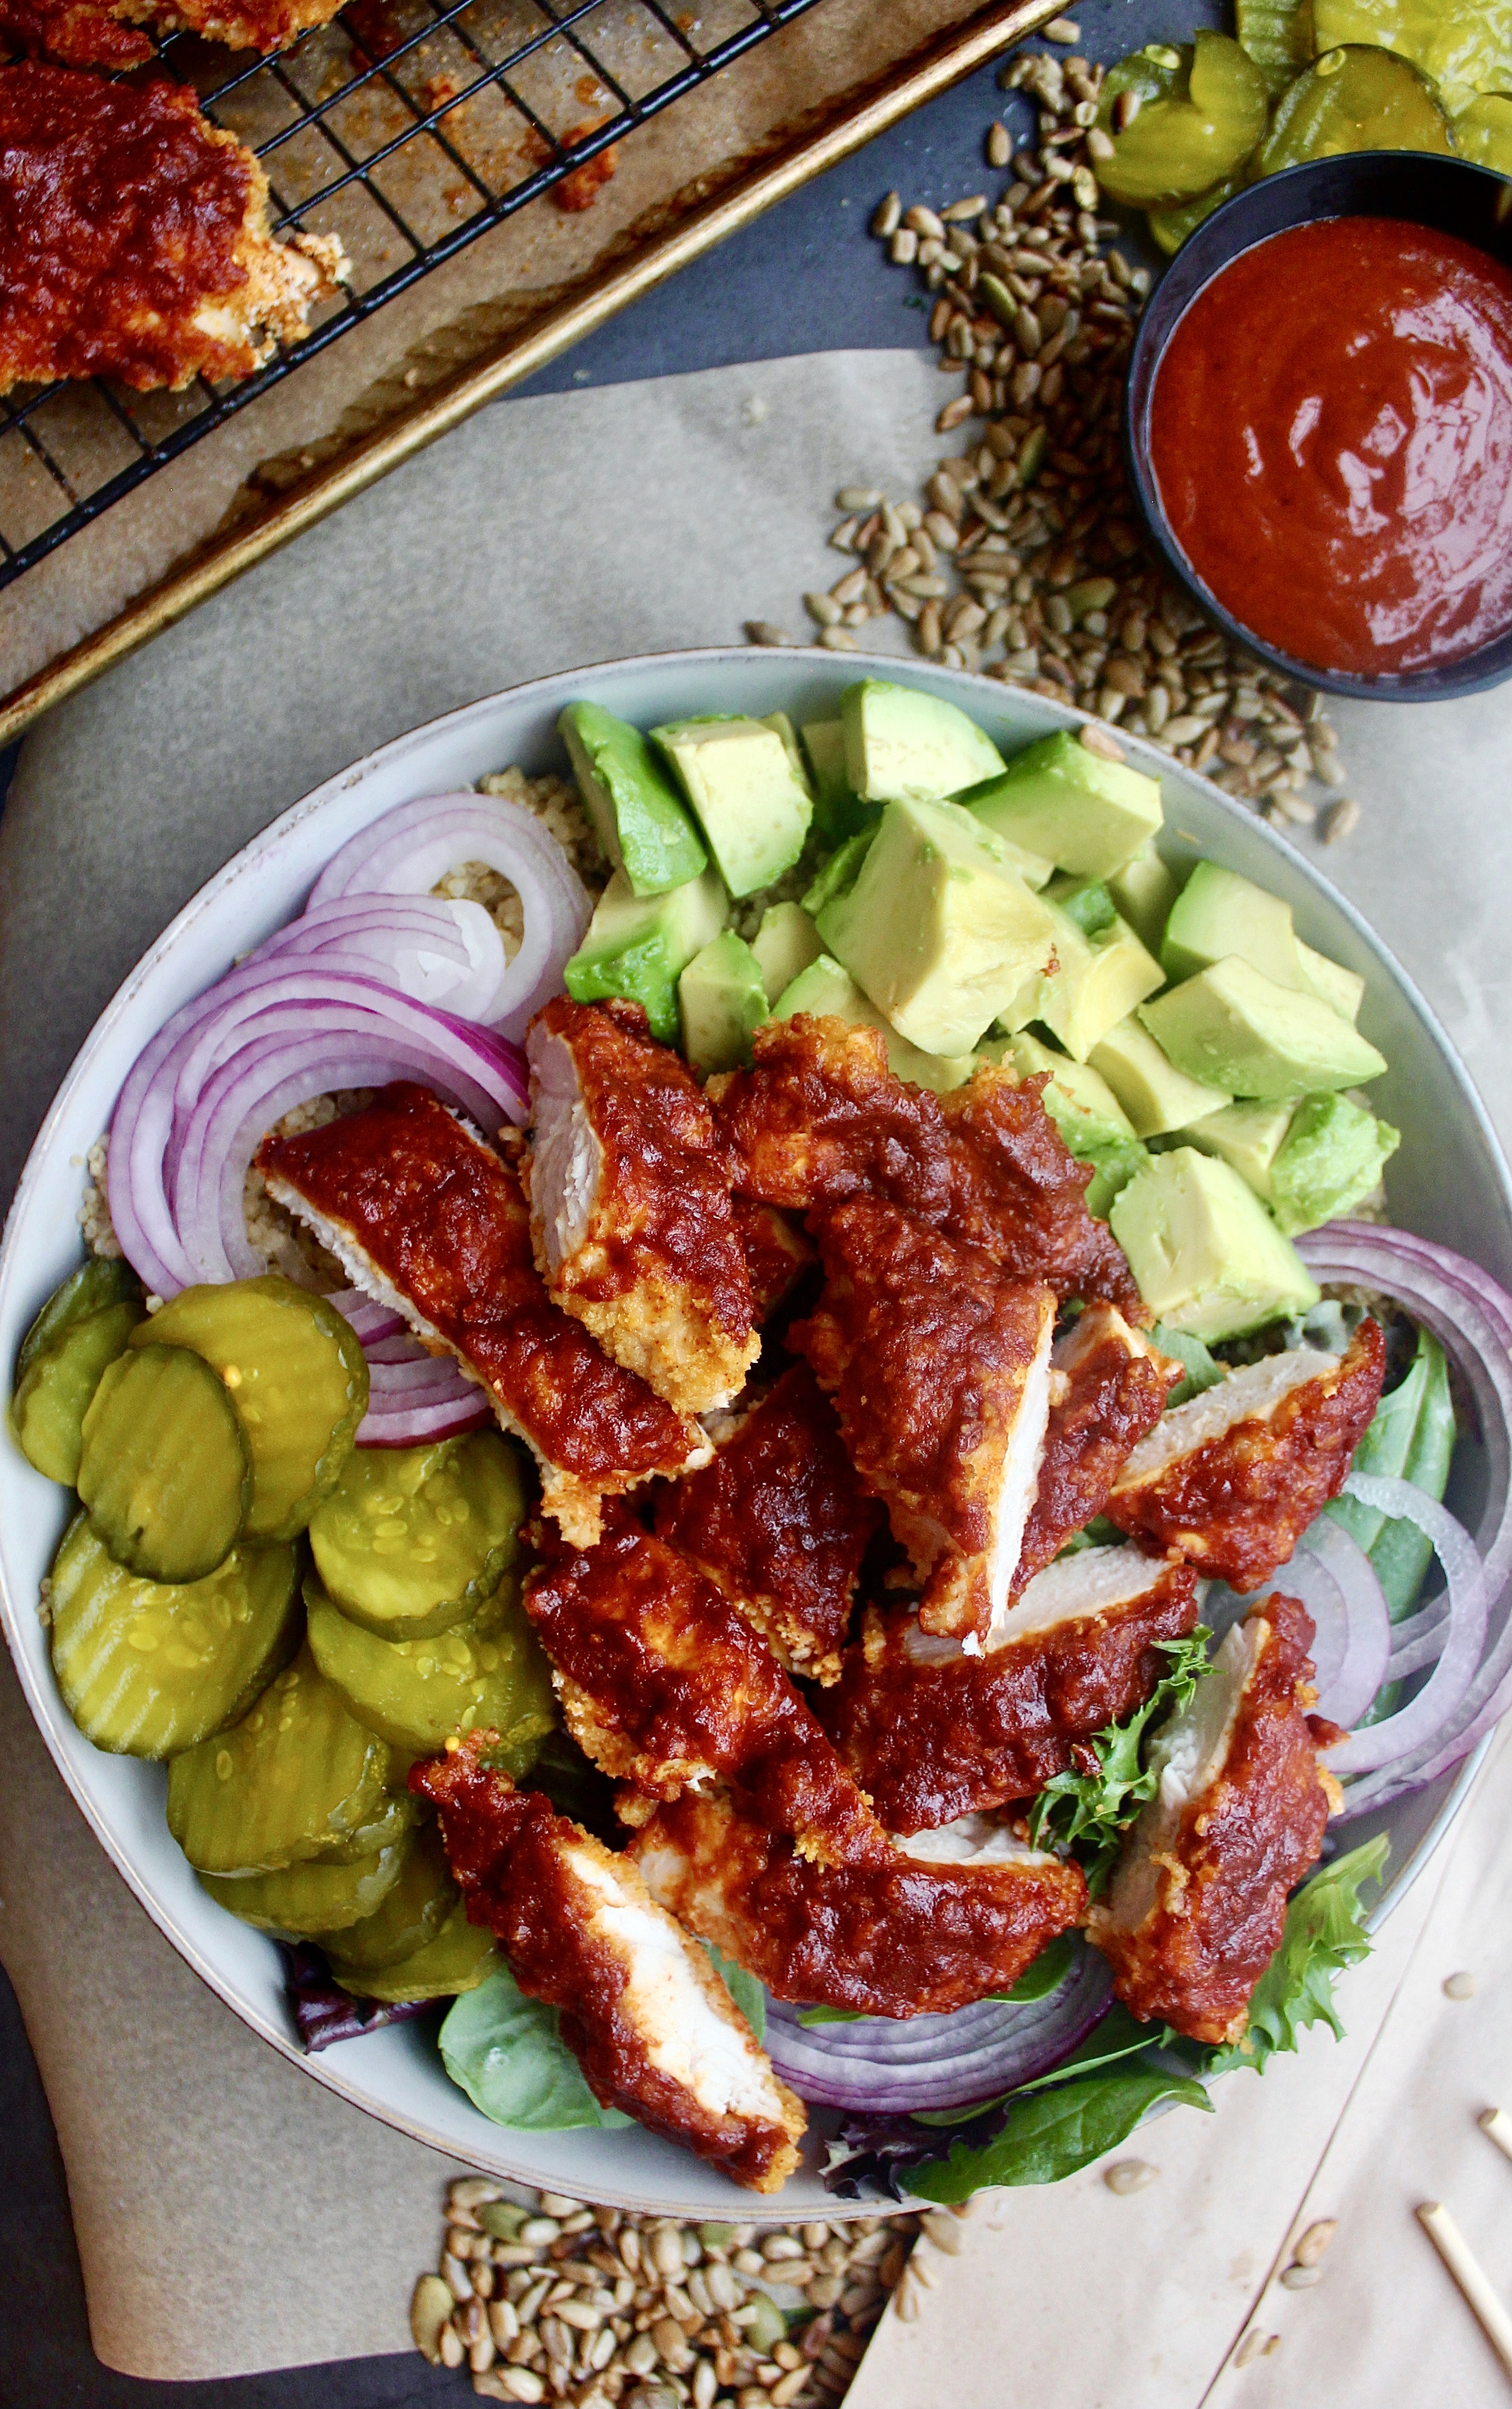 A lighter take on the classic crispy southern chicken all chopped up in a bowl with your fav sweet and spicy  toppings: these Healthier Nashville Hot Chicken Bowls are my everything!!